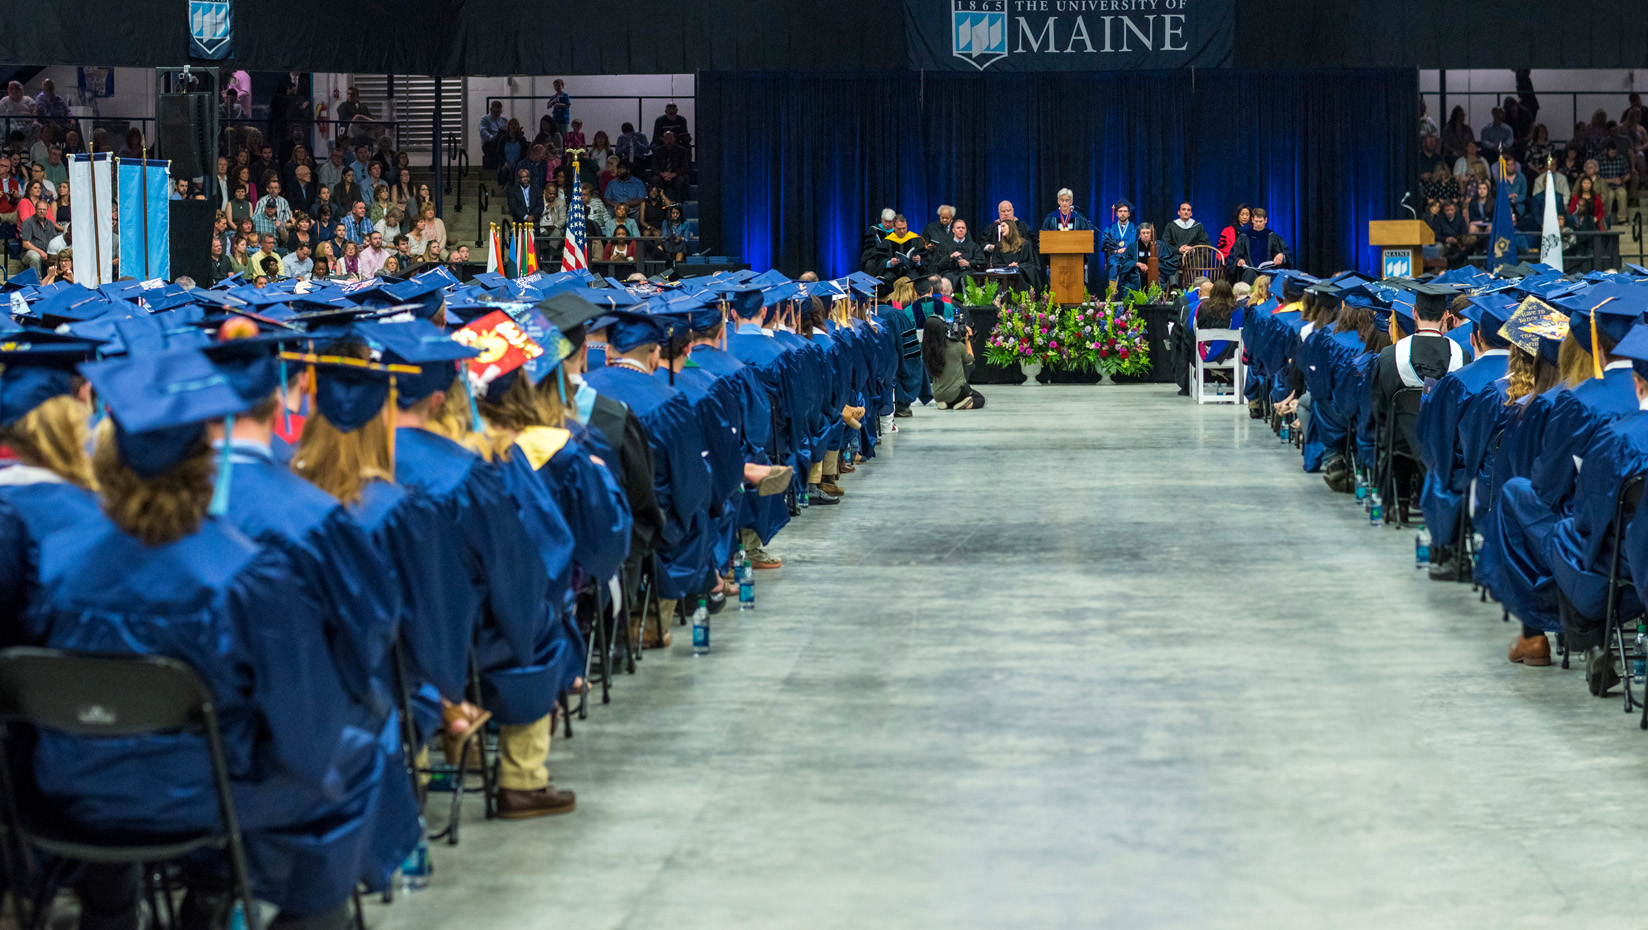 UMaine’s 216th Commencement is May 12 UMaine News University of Maine